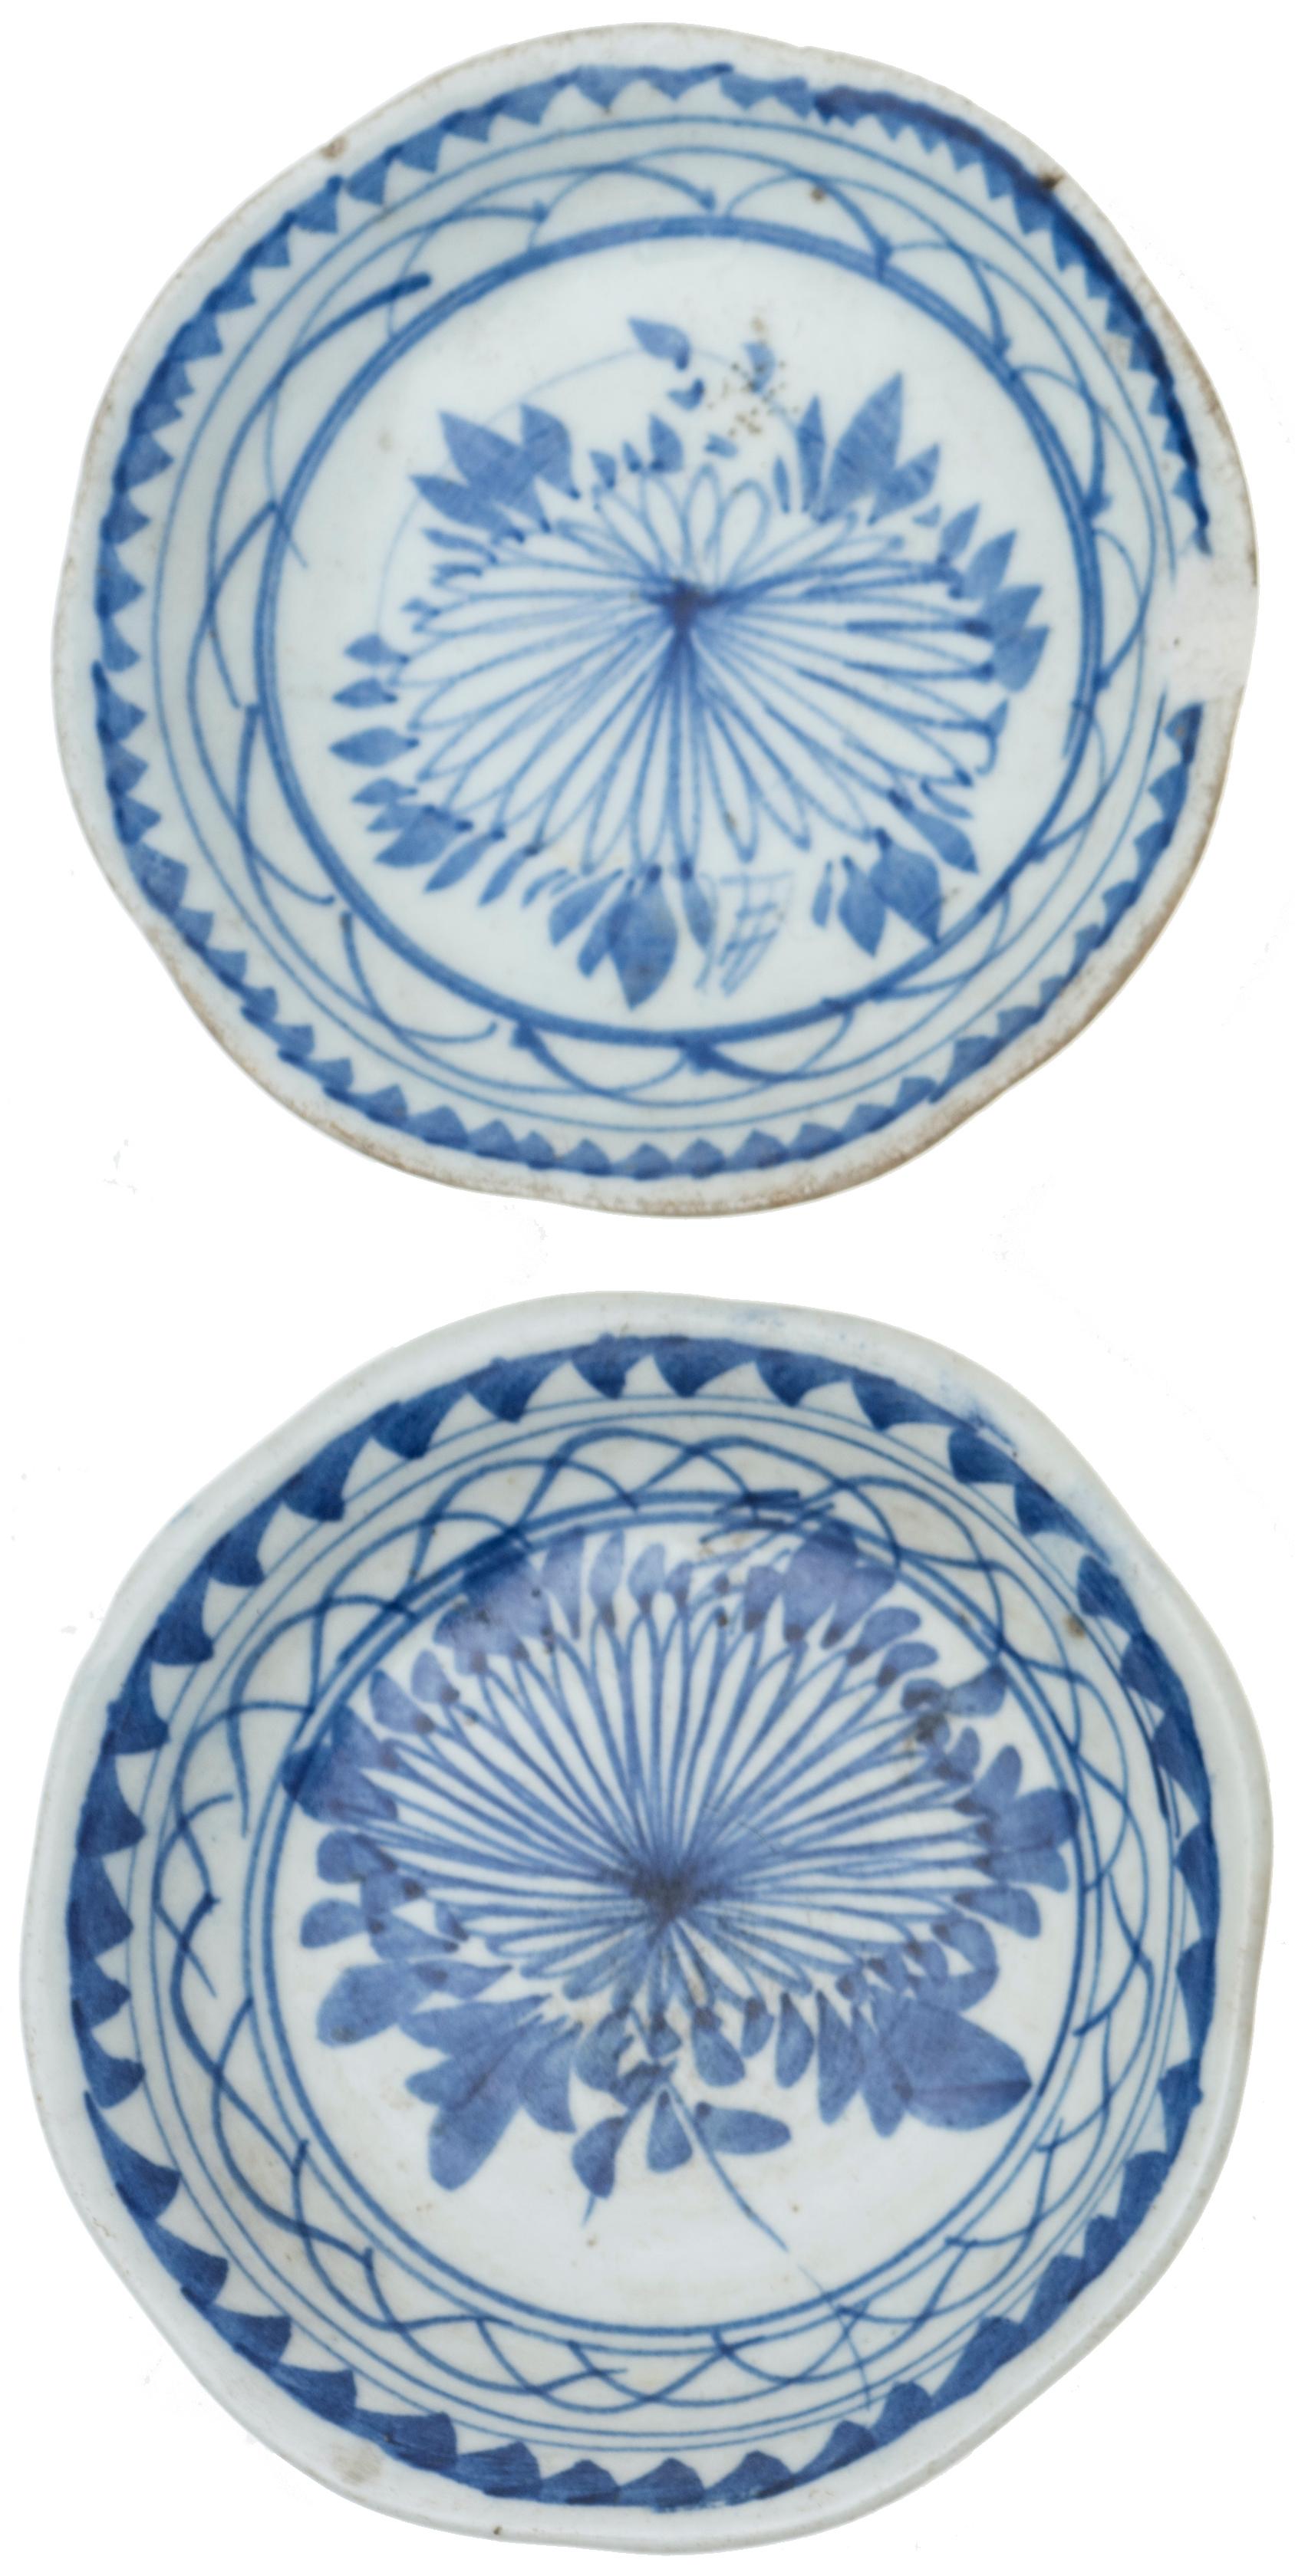 This Oriental plates set is an original decorative porcelain object realized in China by Chinese manufacture during the 19th century. 

These vintage blue and white porcelain plates are decorated with flowers ornaments.

Measures: Diameter 18